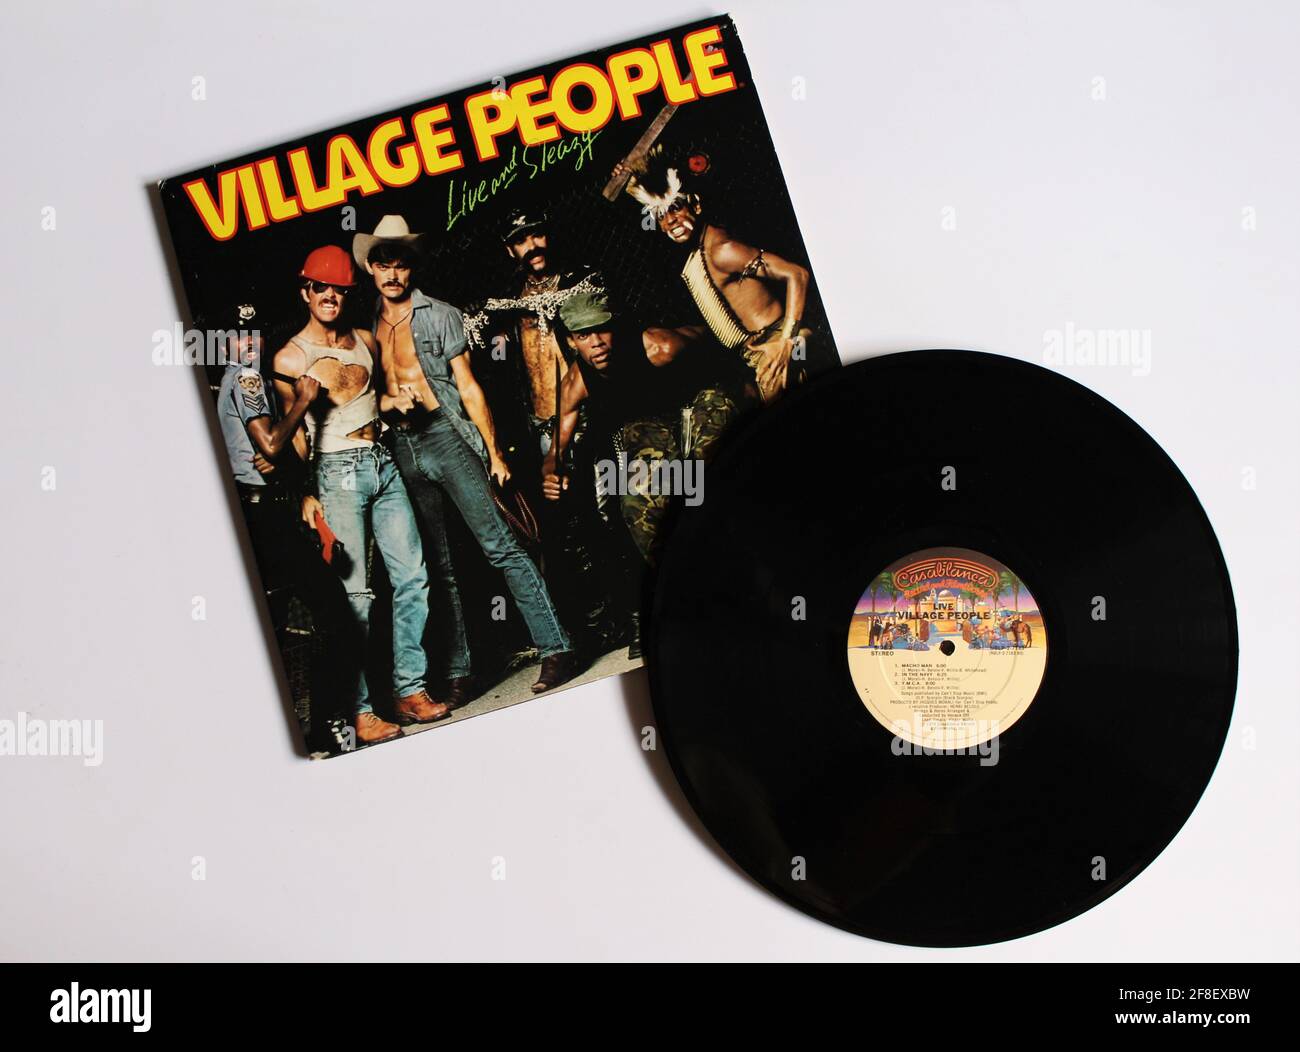 Disco, funk, and soul band, the Village People music album on vinyl record LP disc. Titled: Live and Sleazy Stock Photo